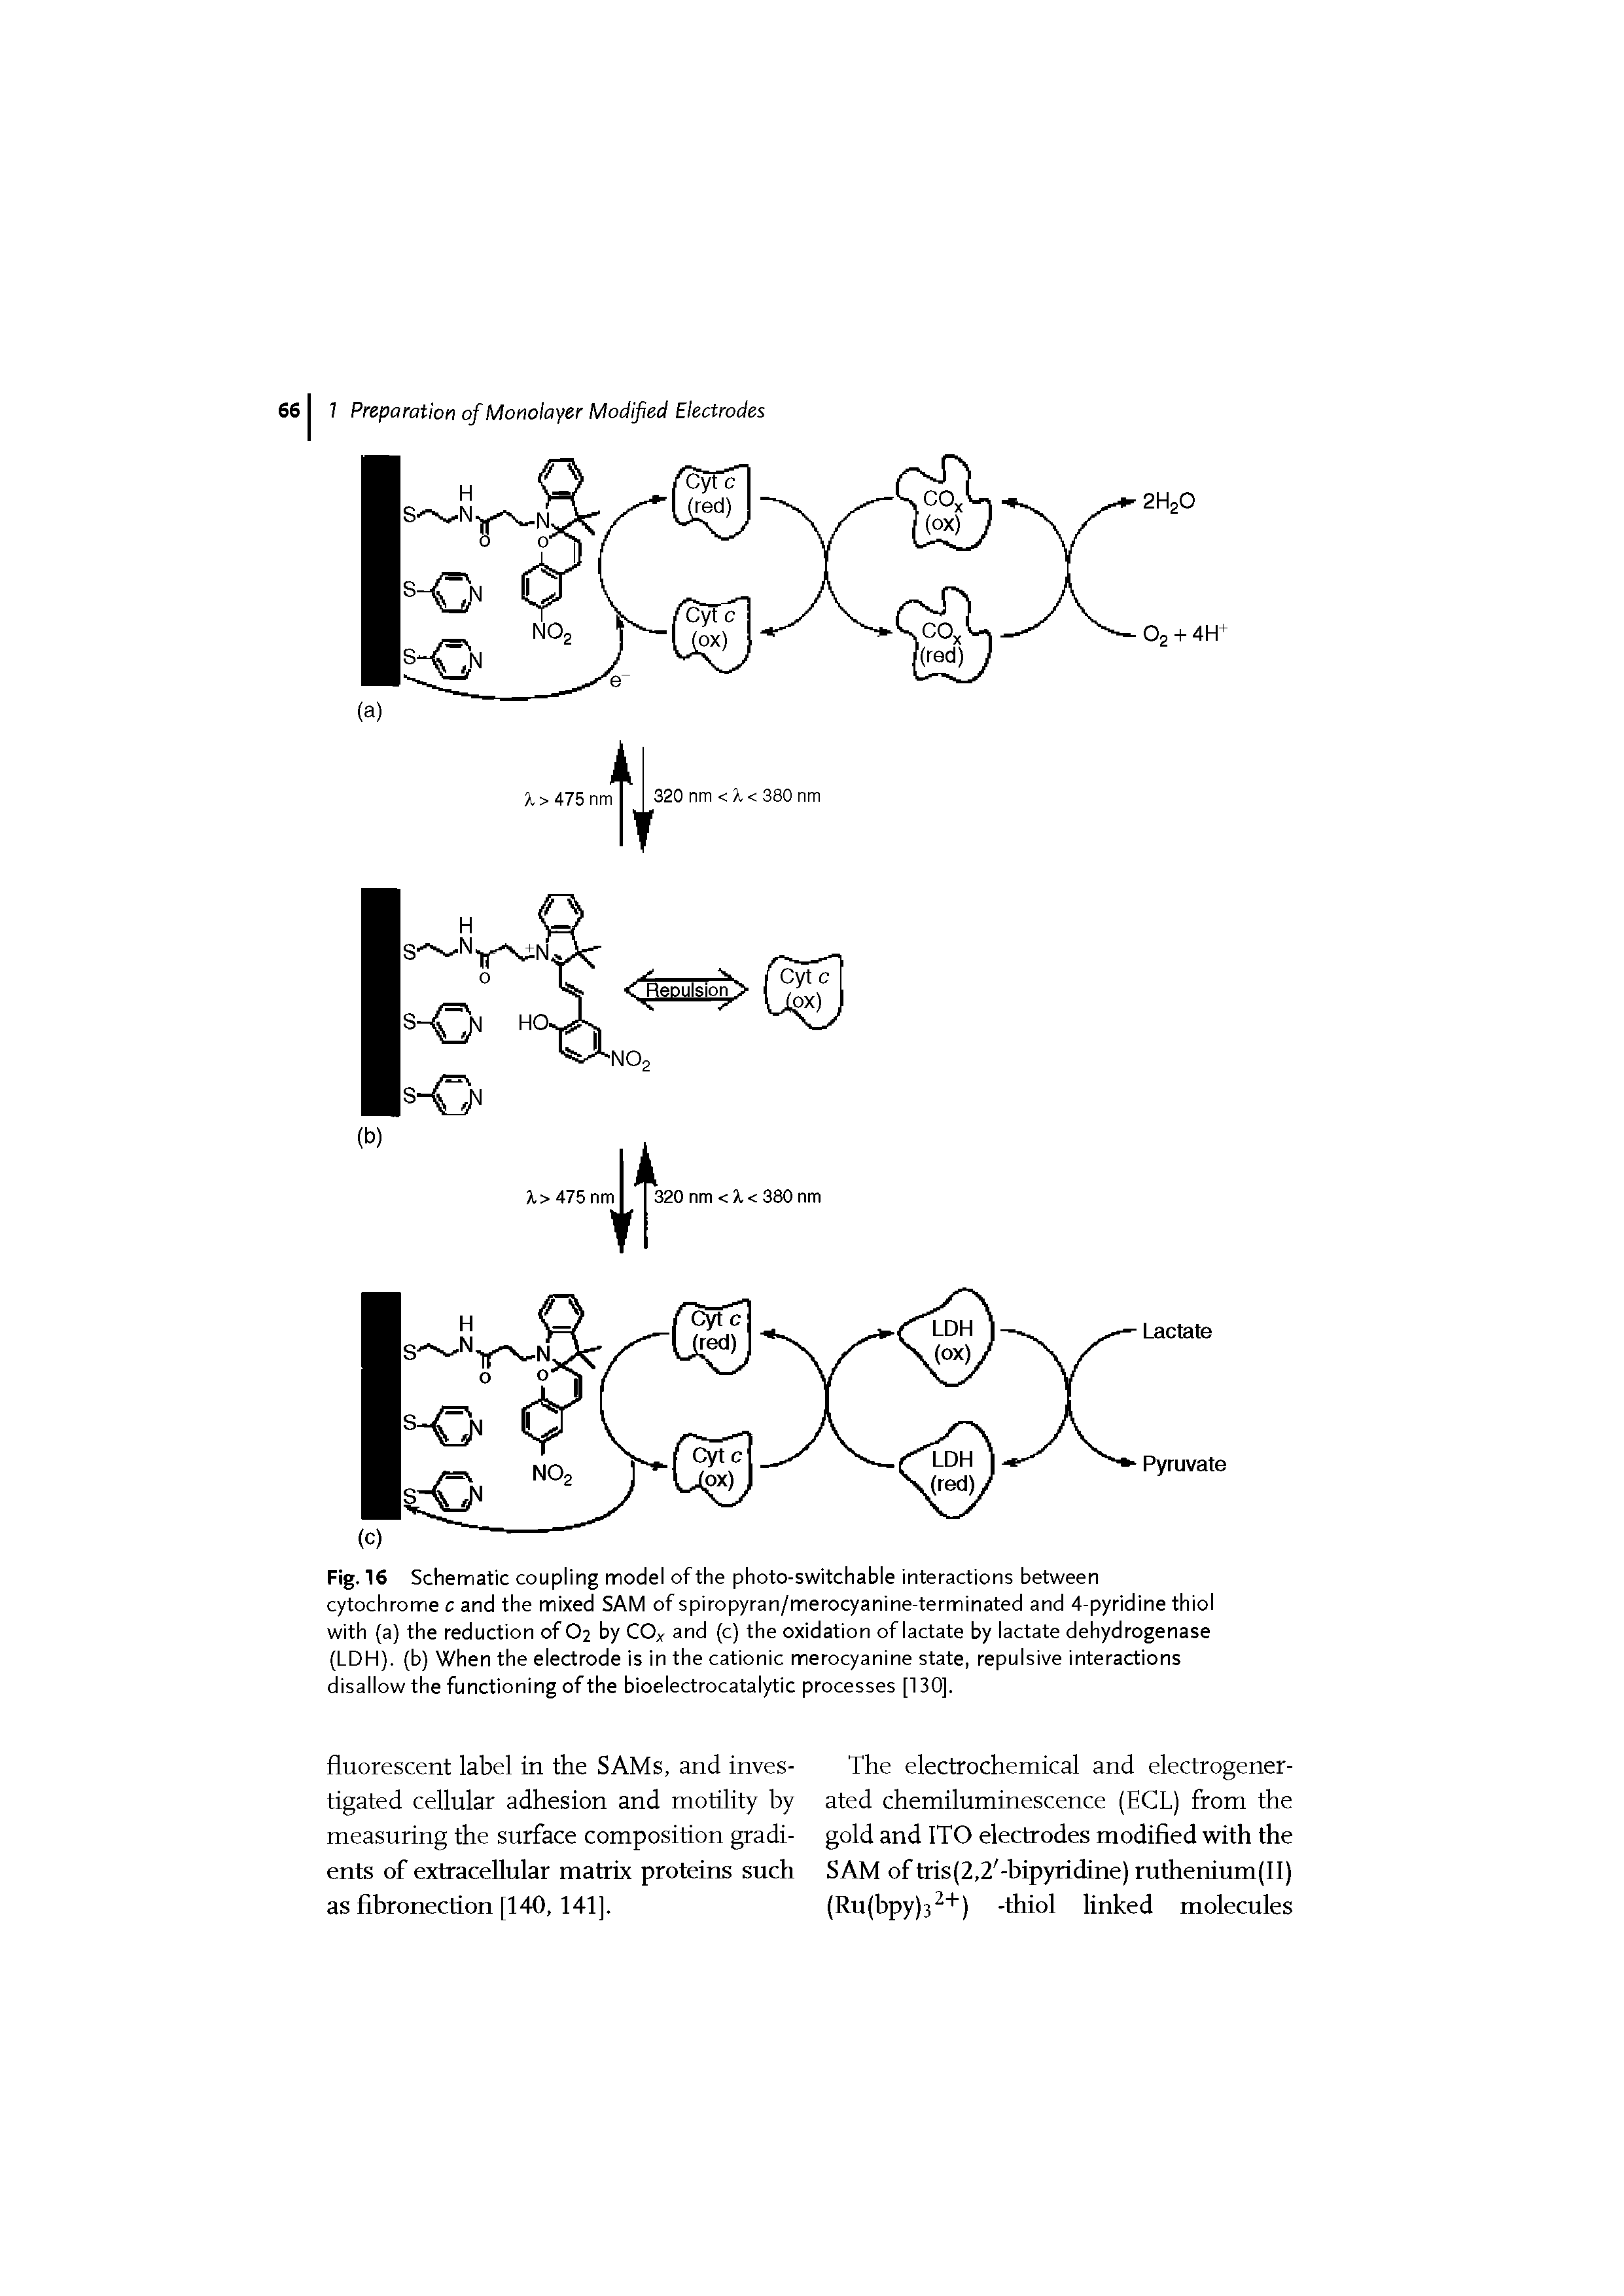 Fig. 16 Schematic coupling model of the photo-switchable interactions between cytochrome c and the mixed SAM of spiropyran/merocyanine-terminated and 4-pyridine thiol with (a) the reduction of O2 by COx and (c) the oxidation of lactate by lactate dehydrogenase (LDH). (b) When the electrode is in the cationic merocyanine state, repulsive interactions disallow the functioning of the bioelectrocatalytic processes [130].